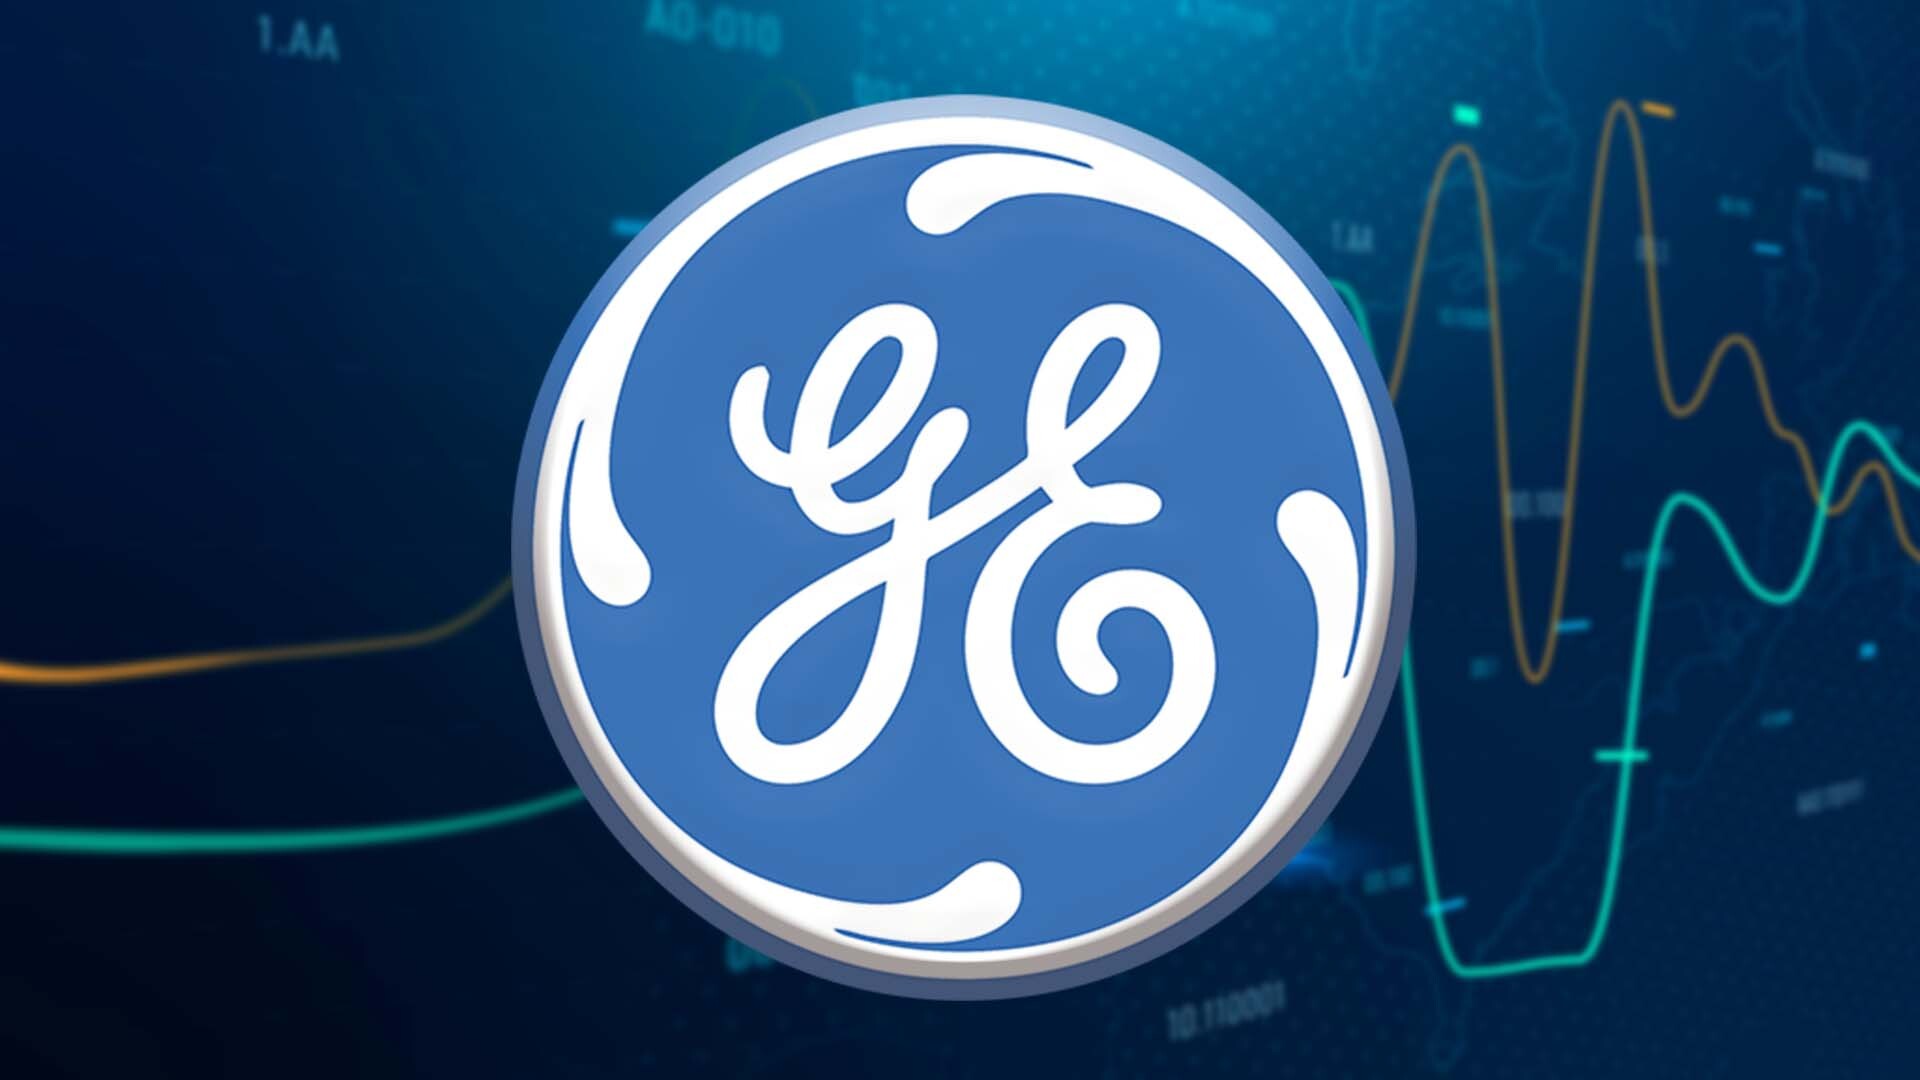 General Electric Stock Price: Will GE Stock Price Be Able To Maintain The Mark Of $100?